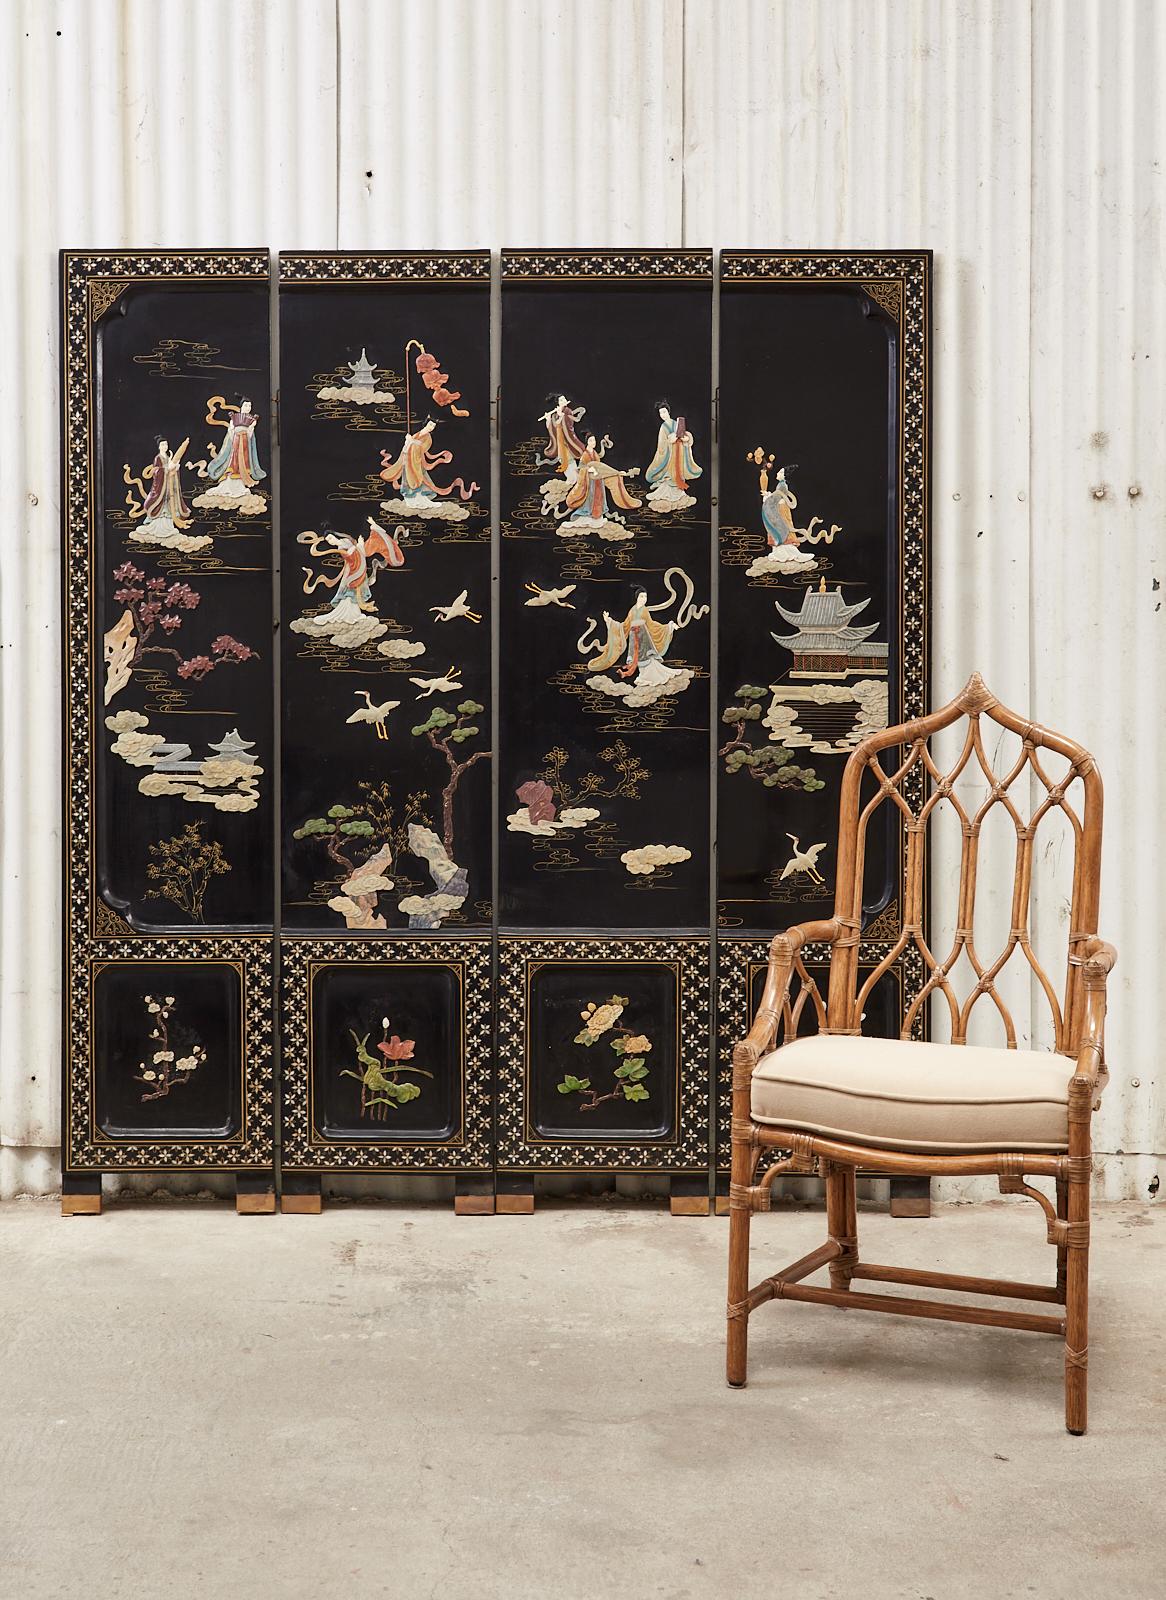 Impressive Chinese export four panel lacquered coromandel screen featuring hand-carved soapstone beauties in a floral landscape with gilt clouds. Each panel has recessed windows with floral motifs on each bottom panel. Supported by patinated brass